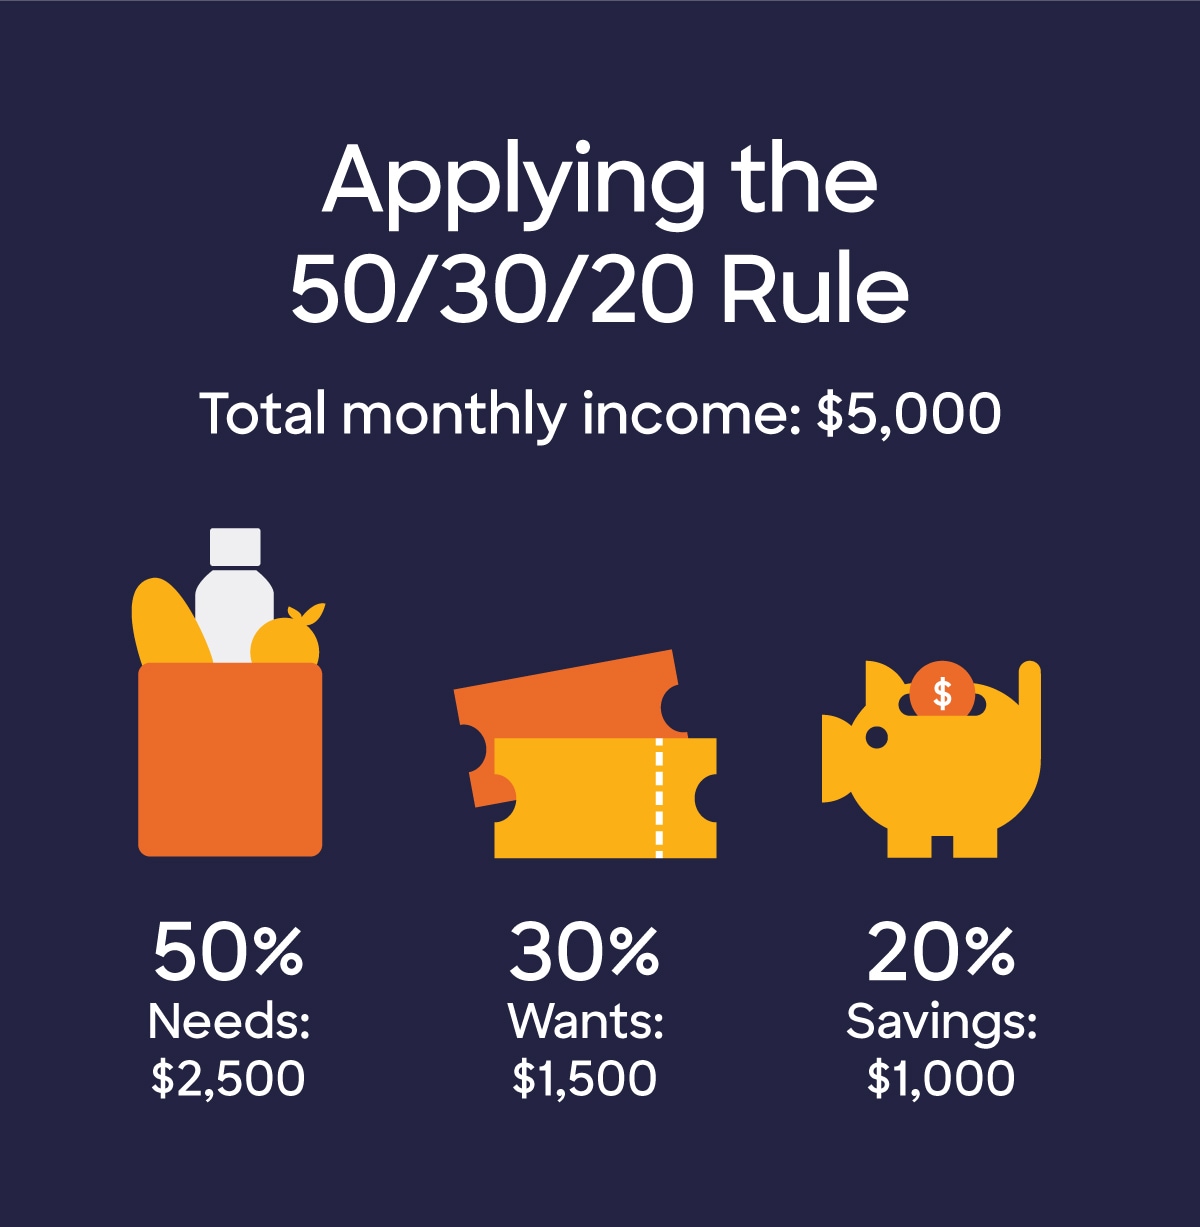 Infographic showing a 50-30-20 split of $5000 income with $2,500 going to needs, $1,500 to wants and $1,000 to savings